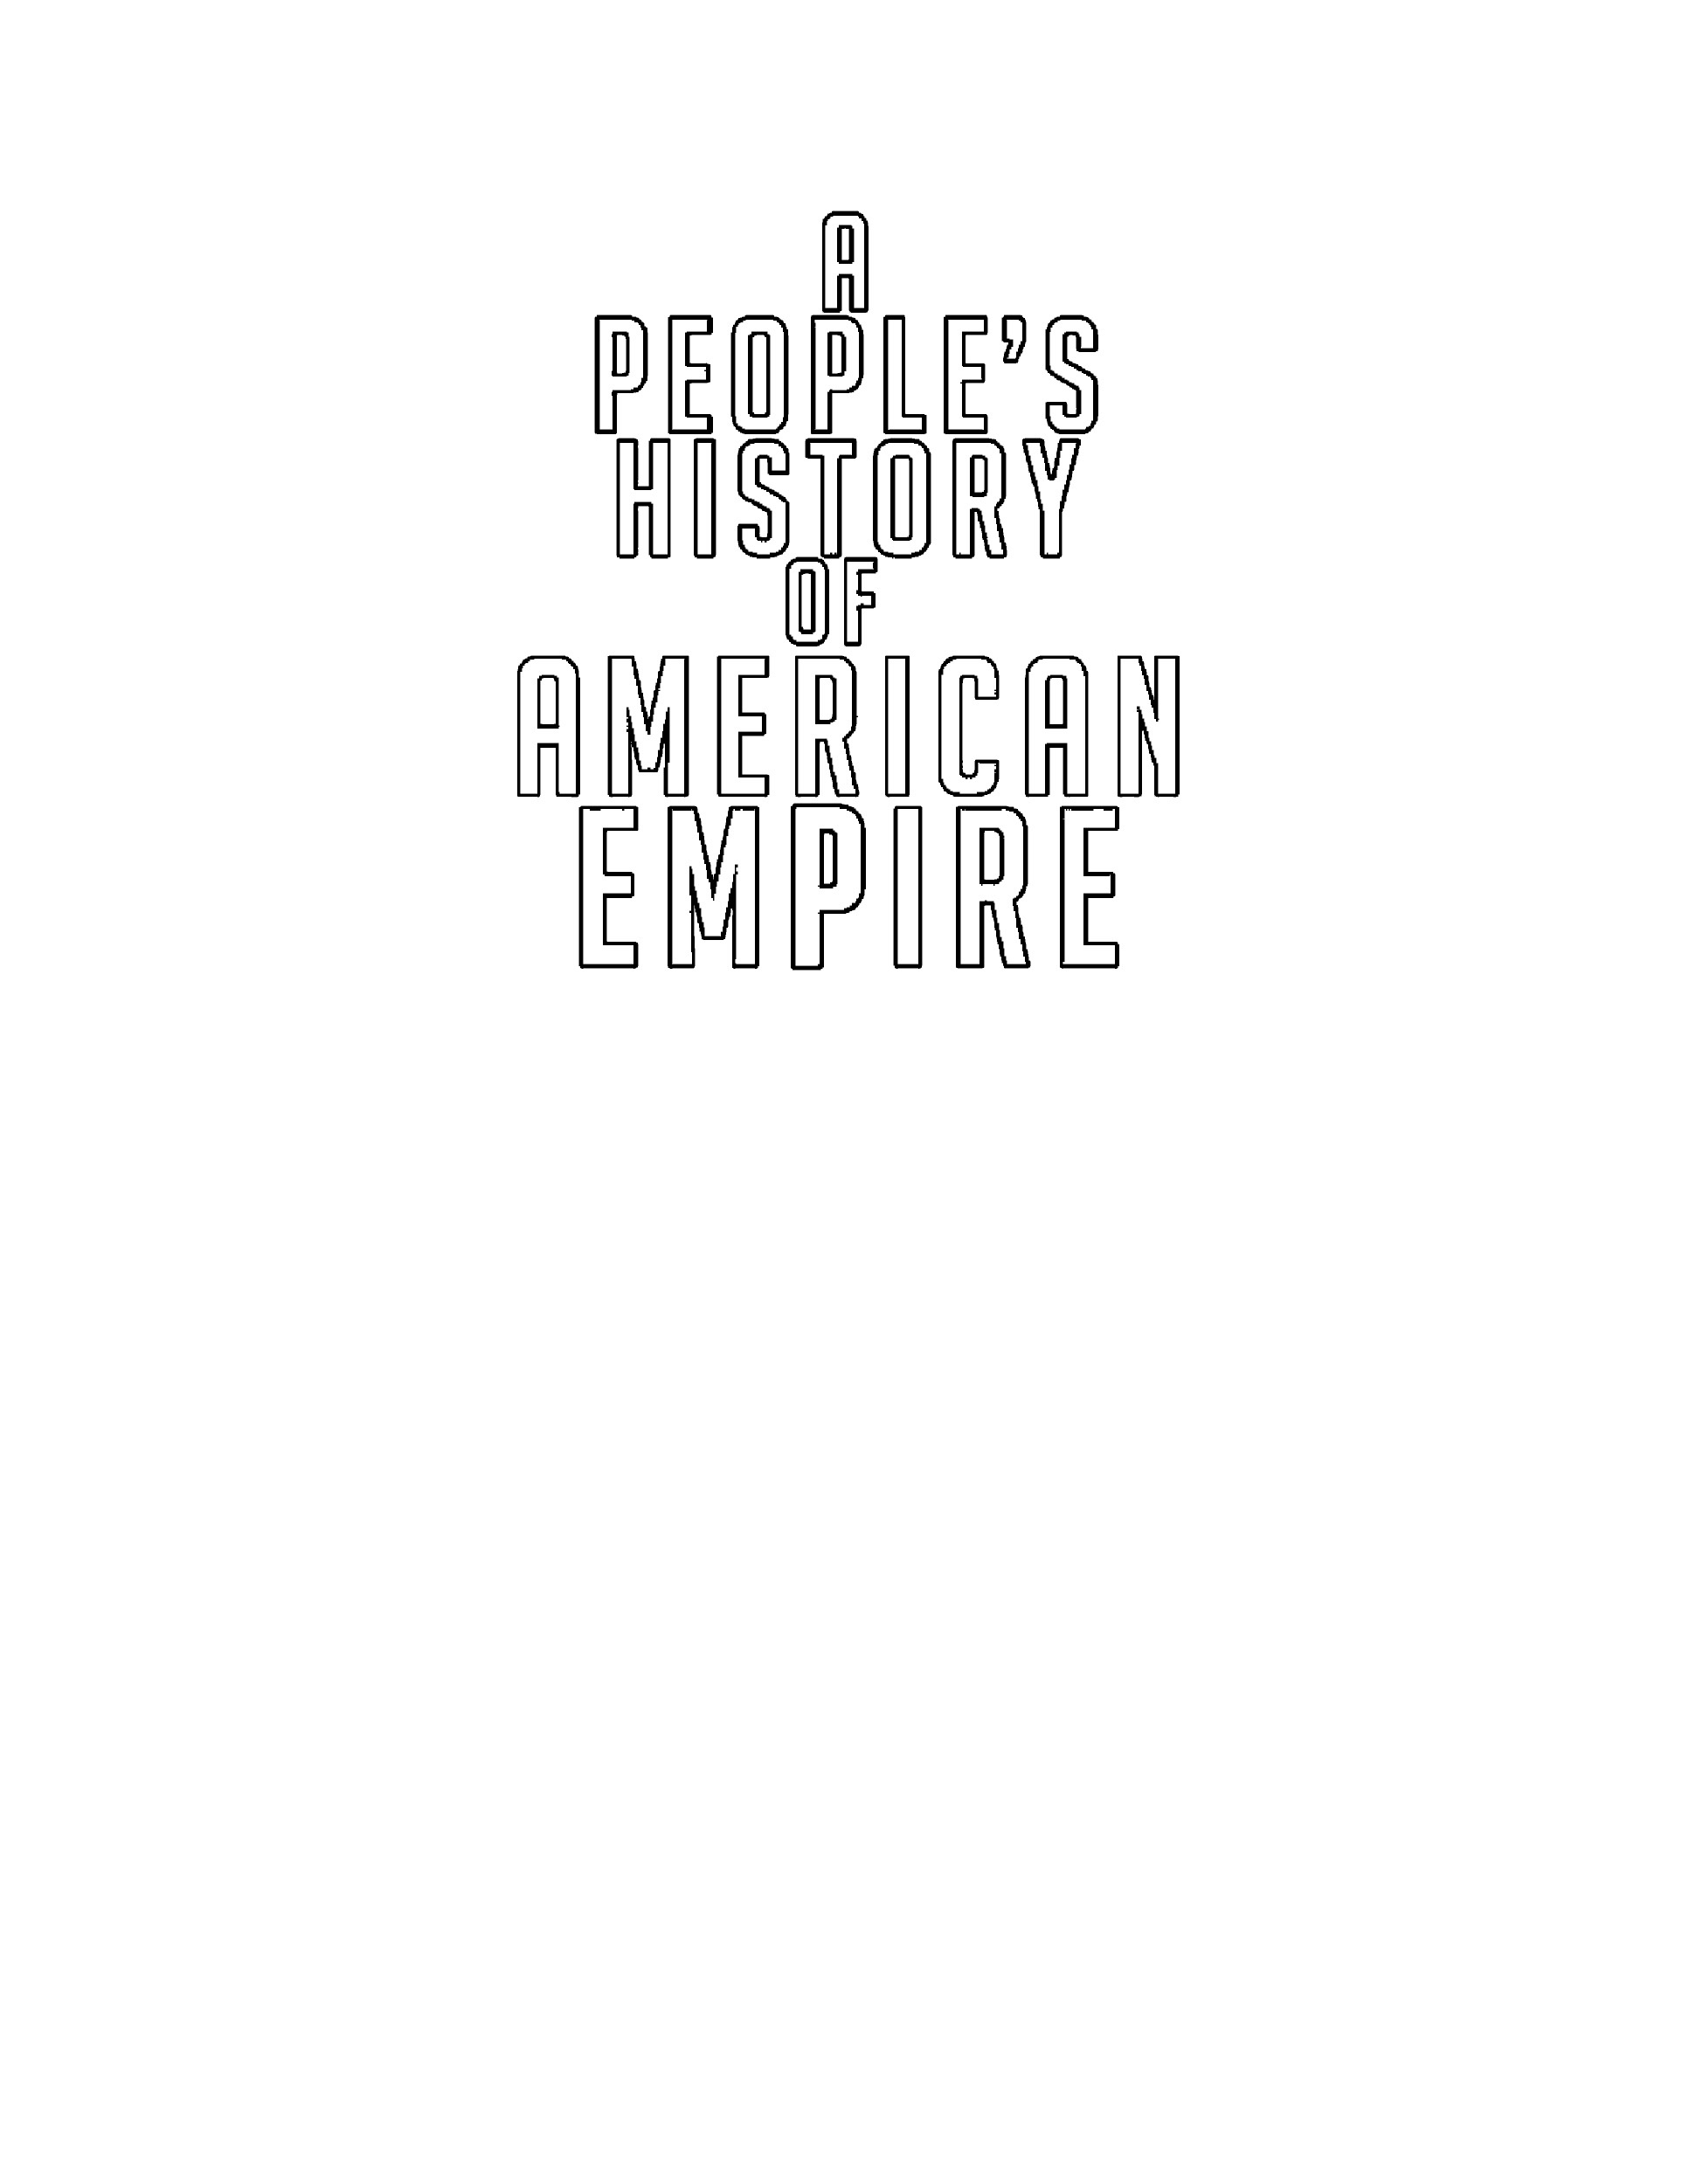 Read online A People's History of American Empire comic -  Issue # TPB (Part 1) - 3